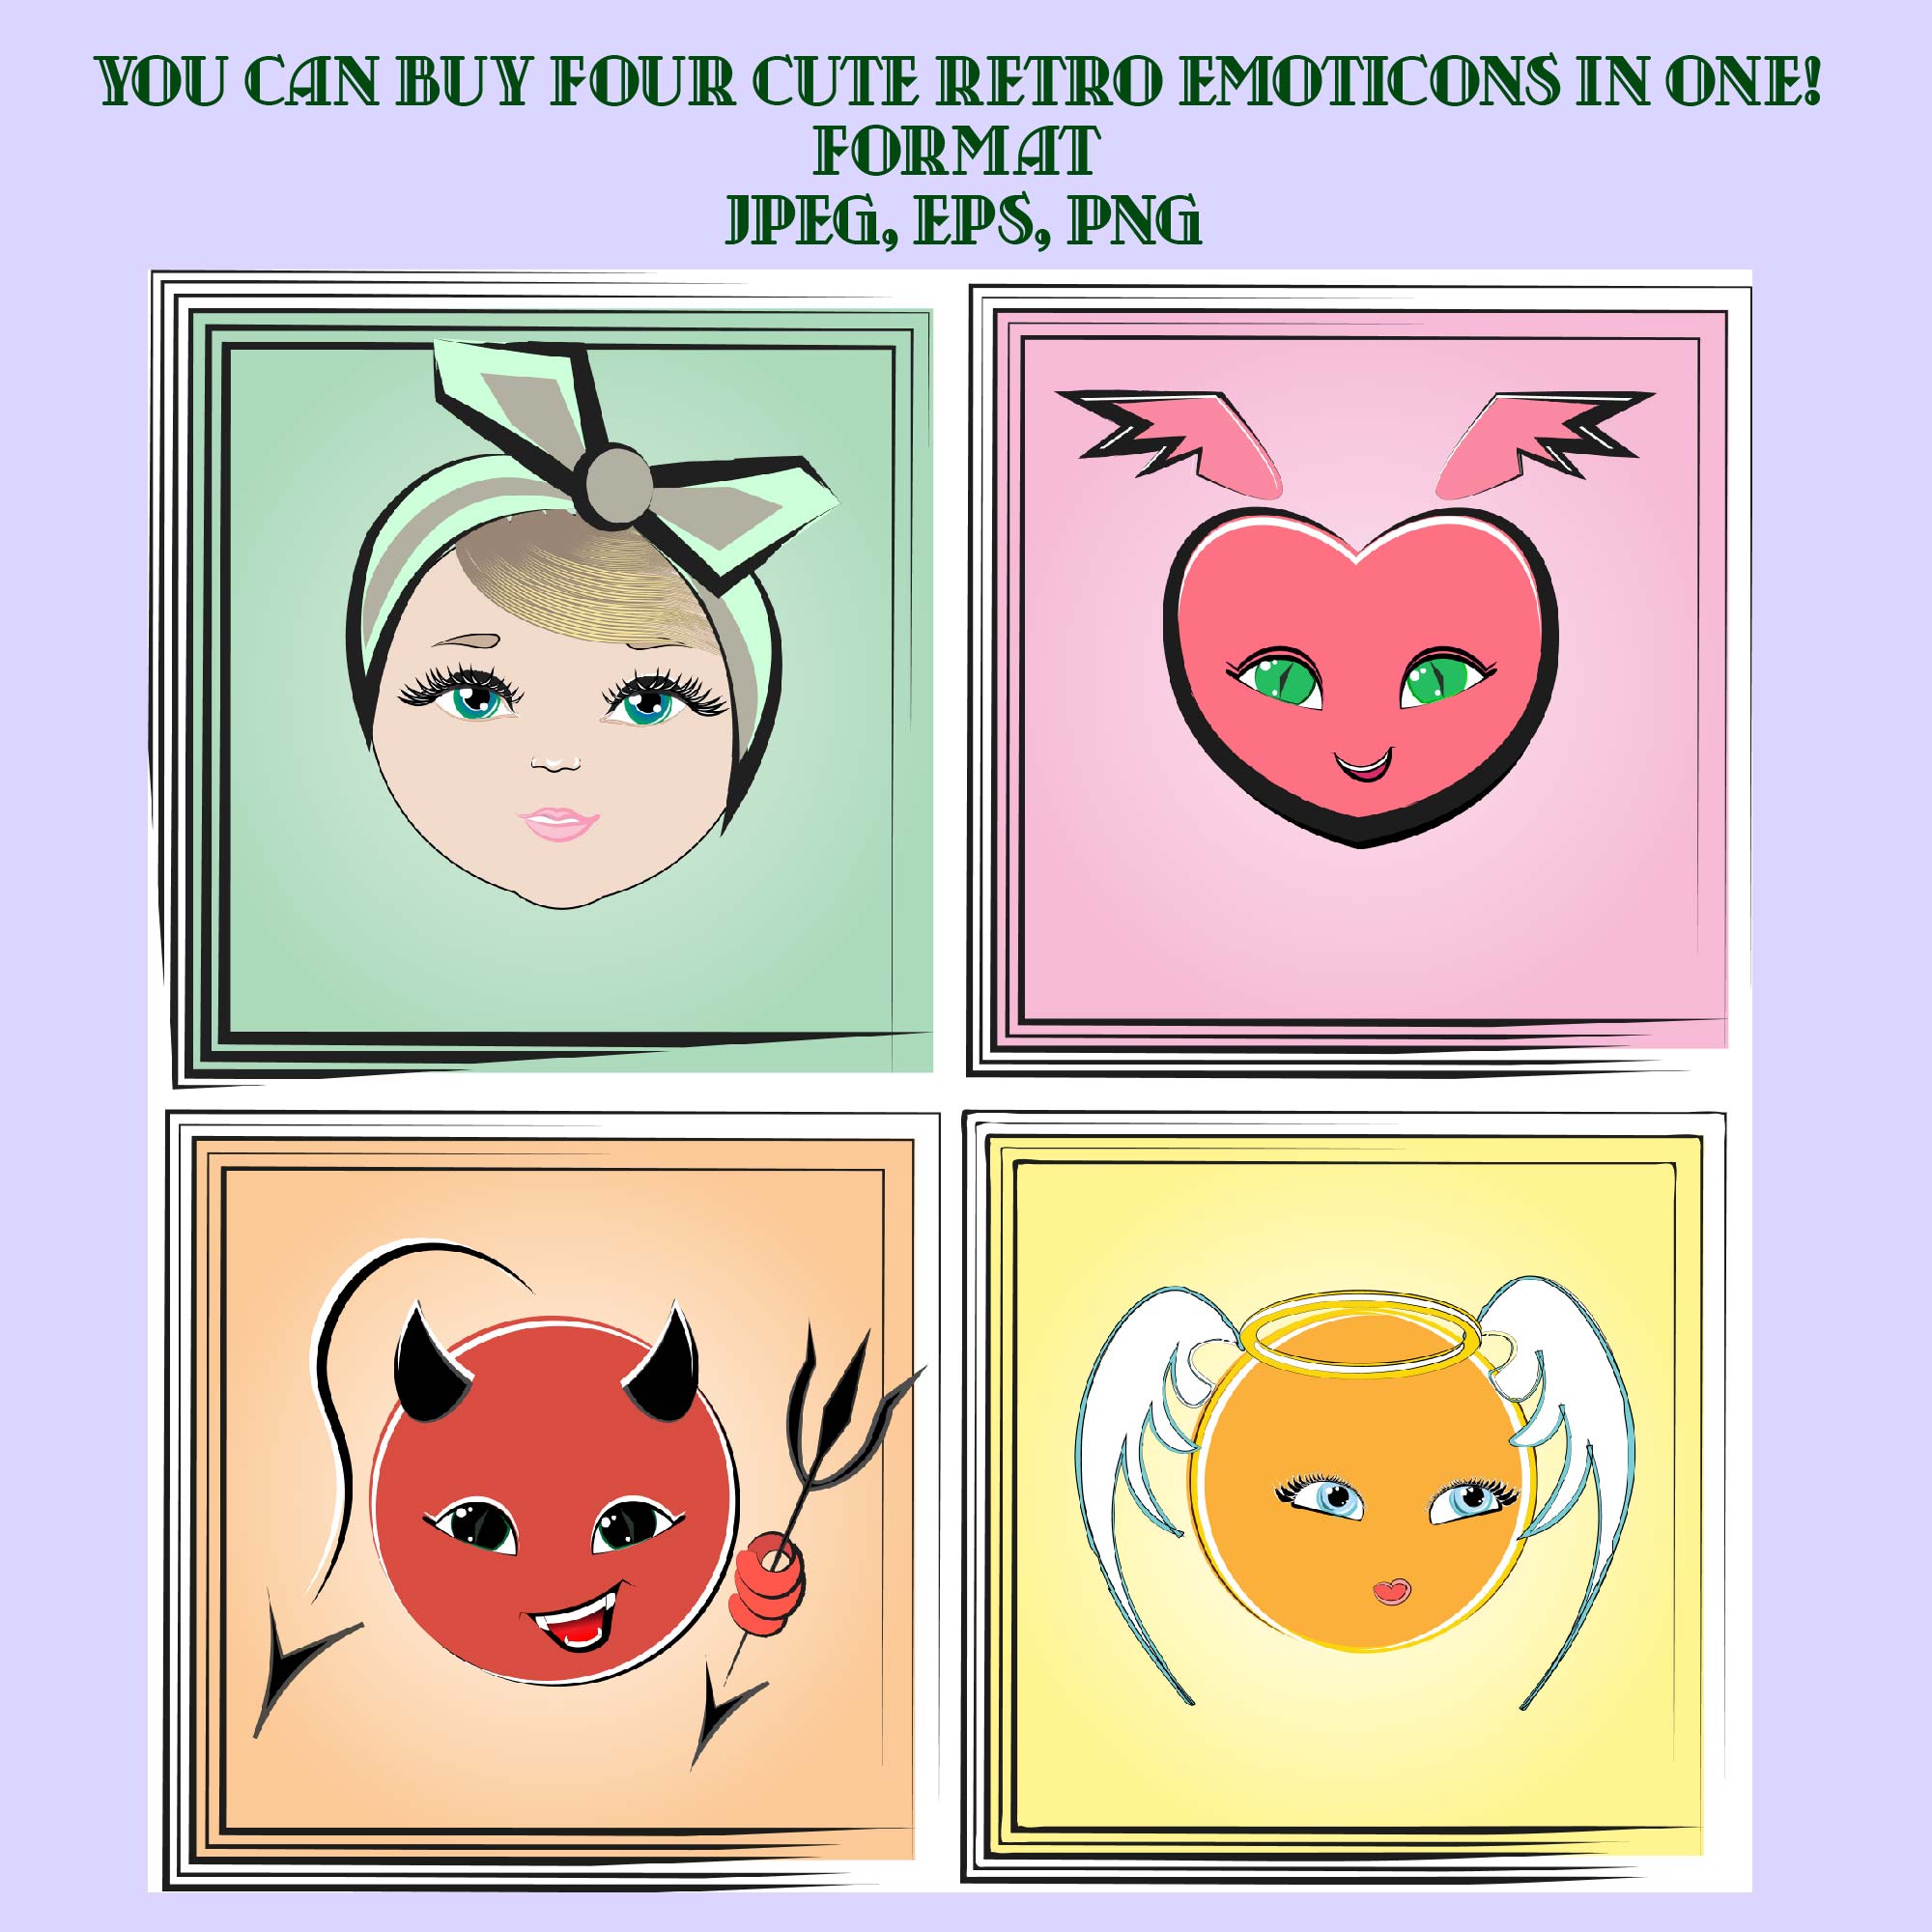 Four Emoticons in Retro Style cover image.